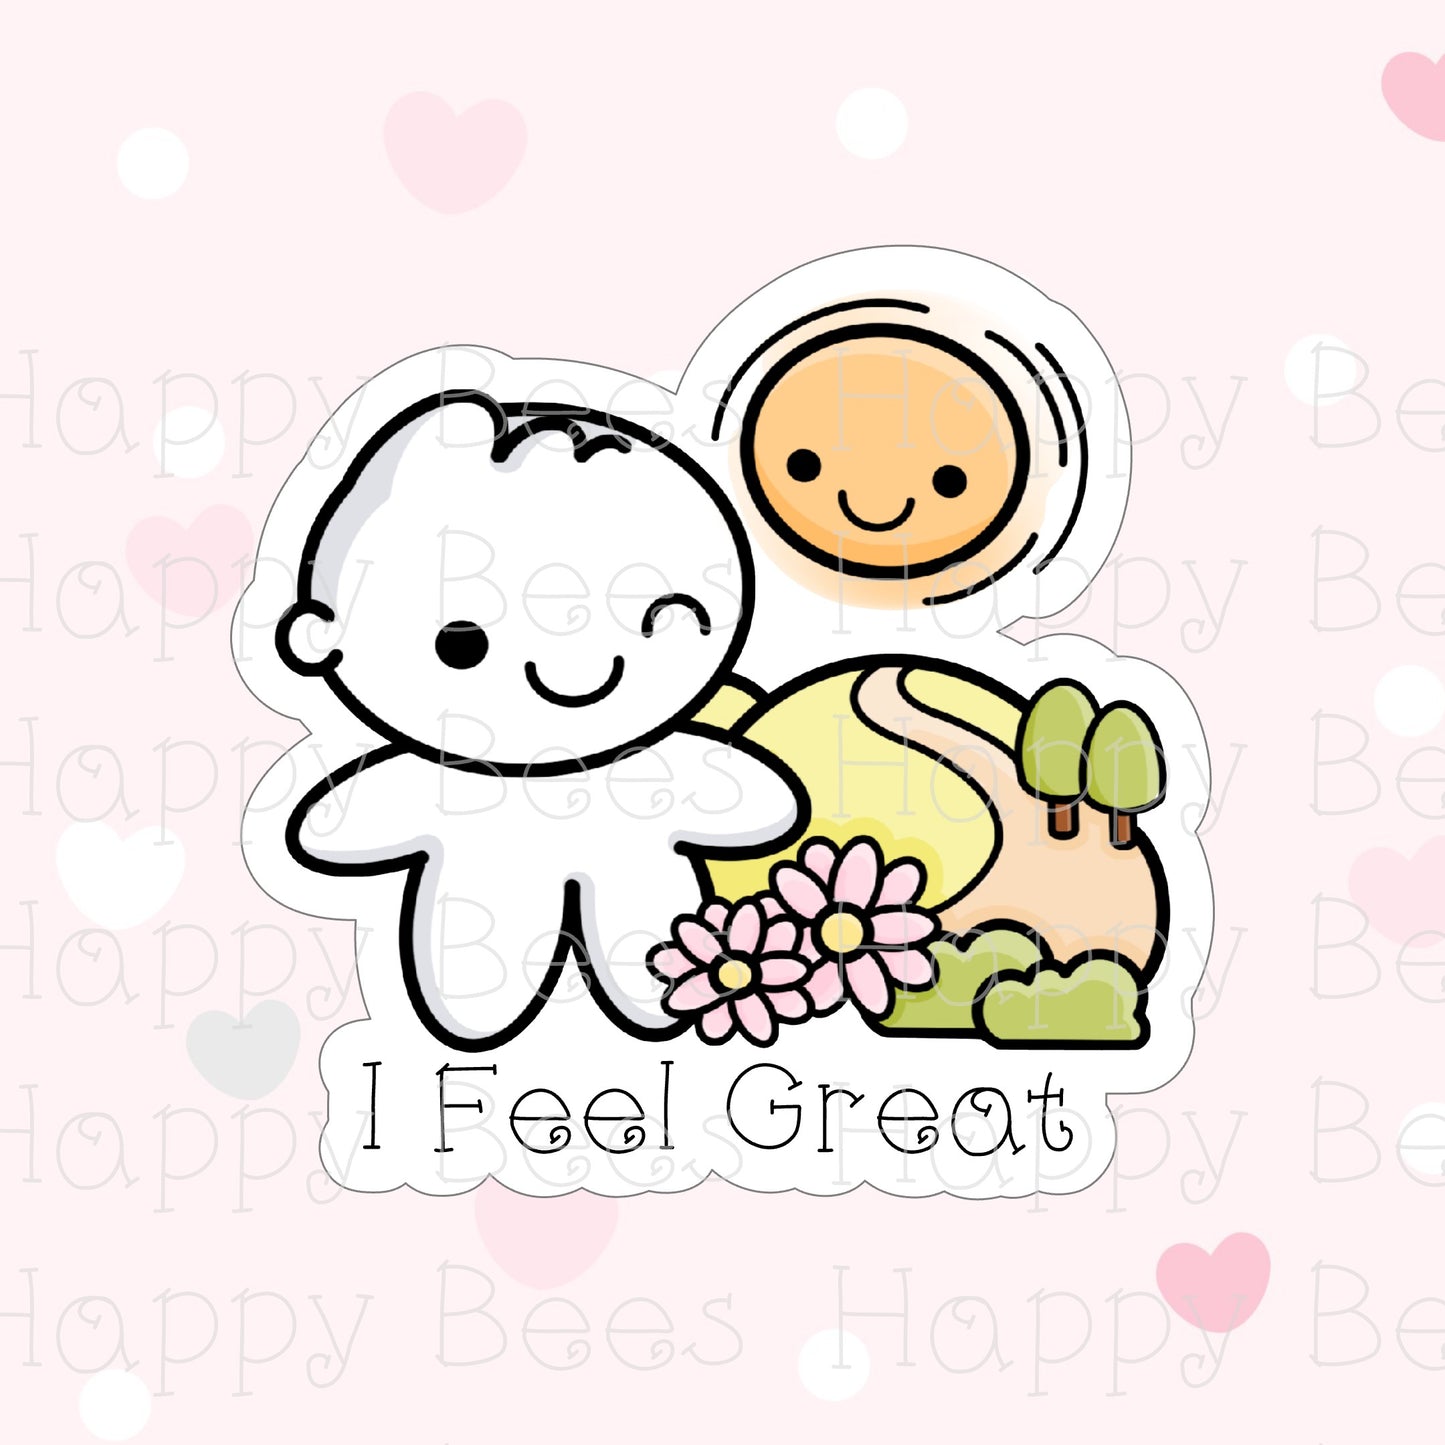 Daily Affirmation Die Cut Doodles - Cute Bullet Journal Planner Stickers DC10023